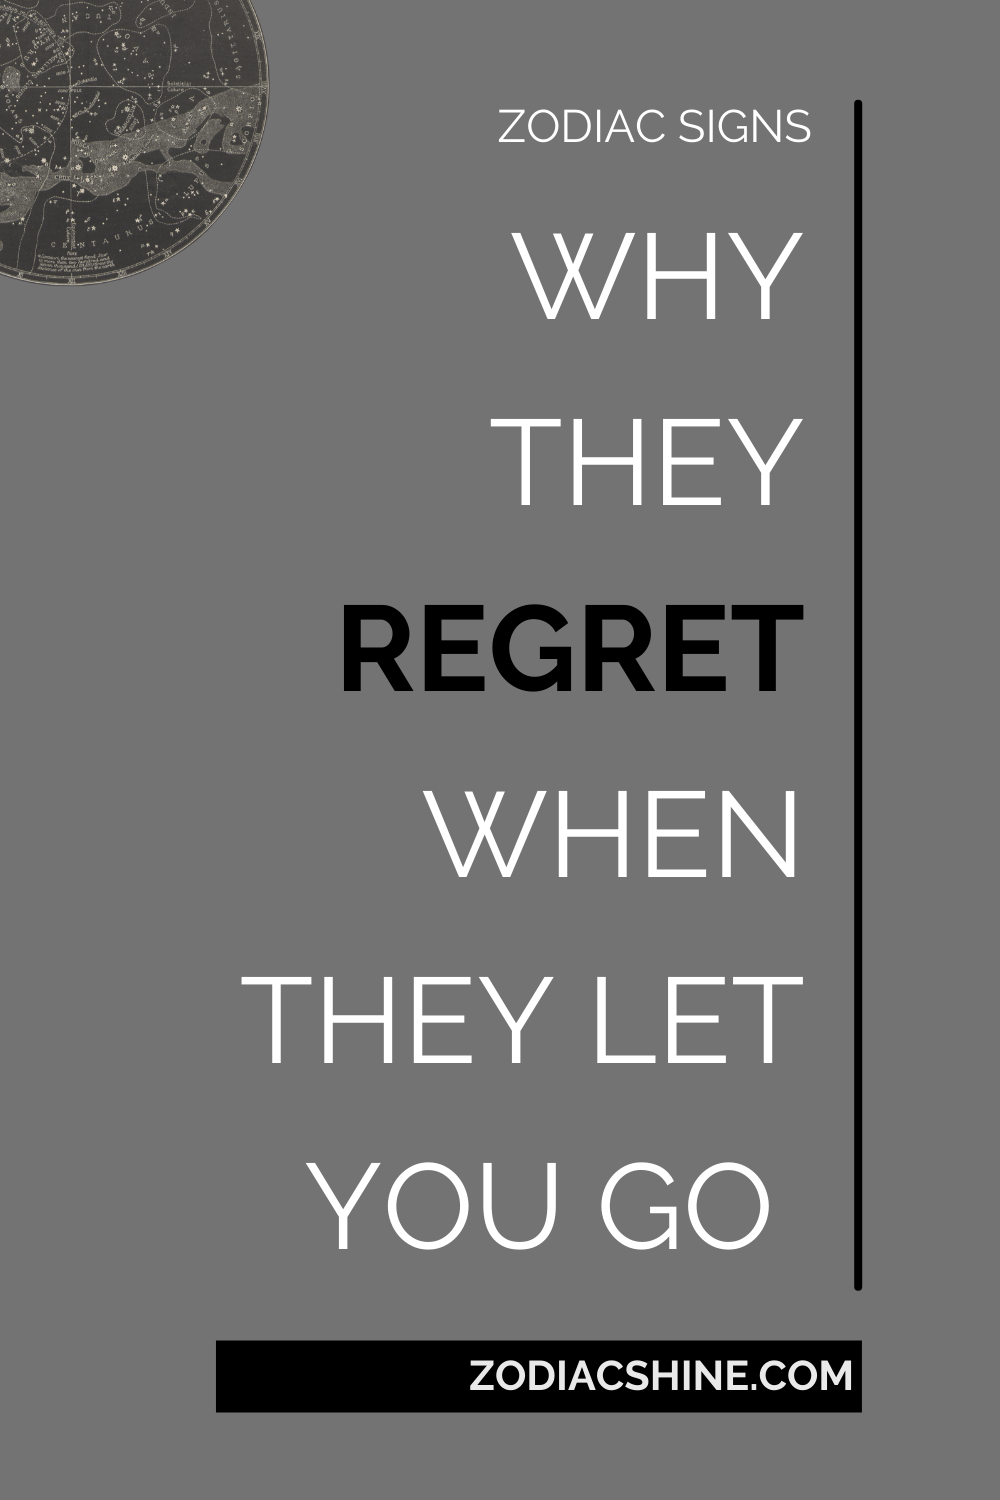 WHY THEY REGRET WHEN THEY LET YOU GO 